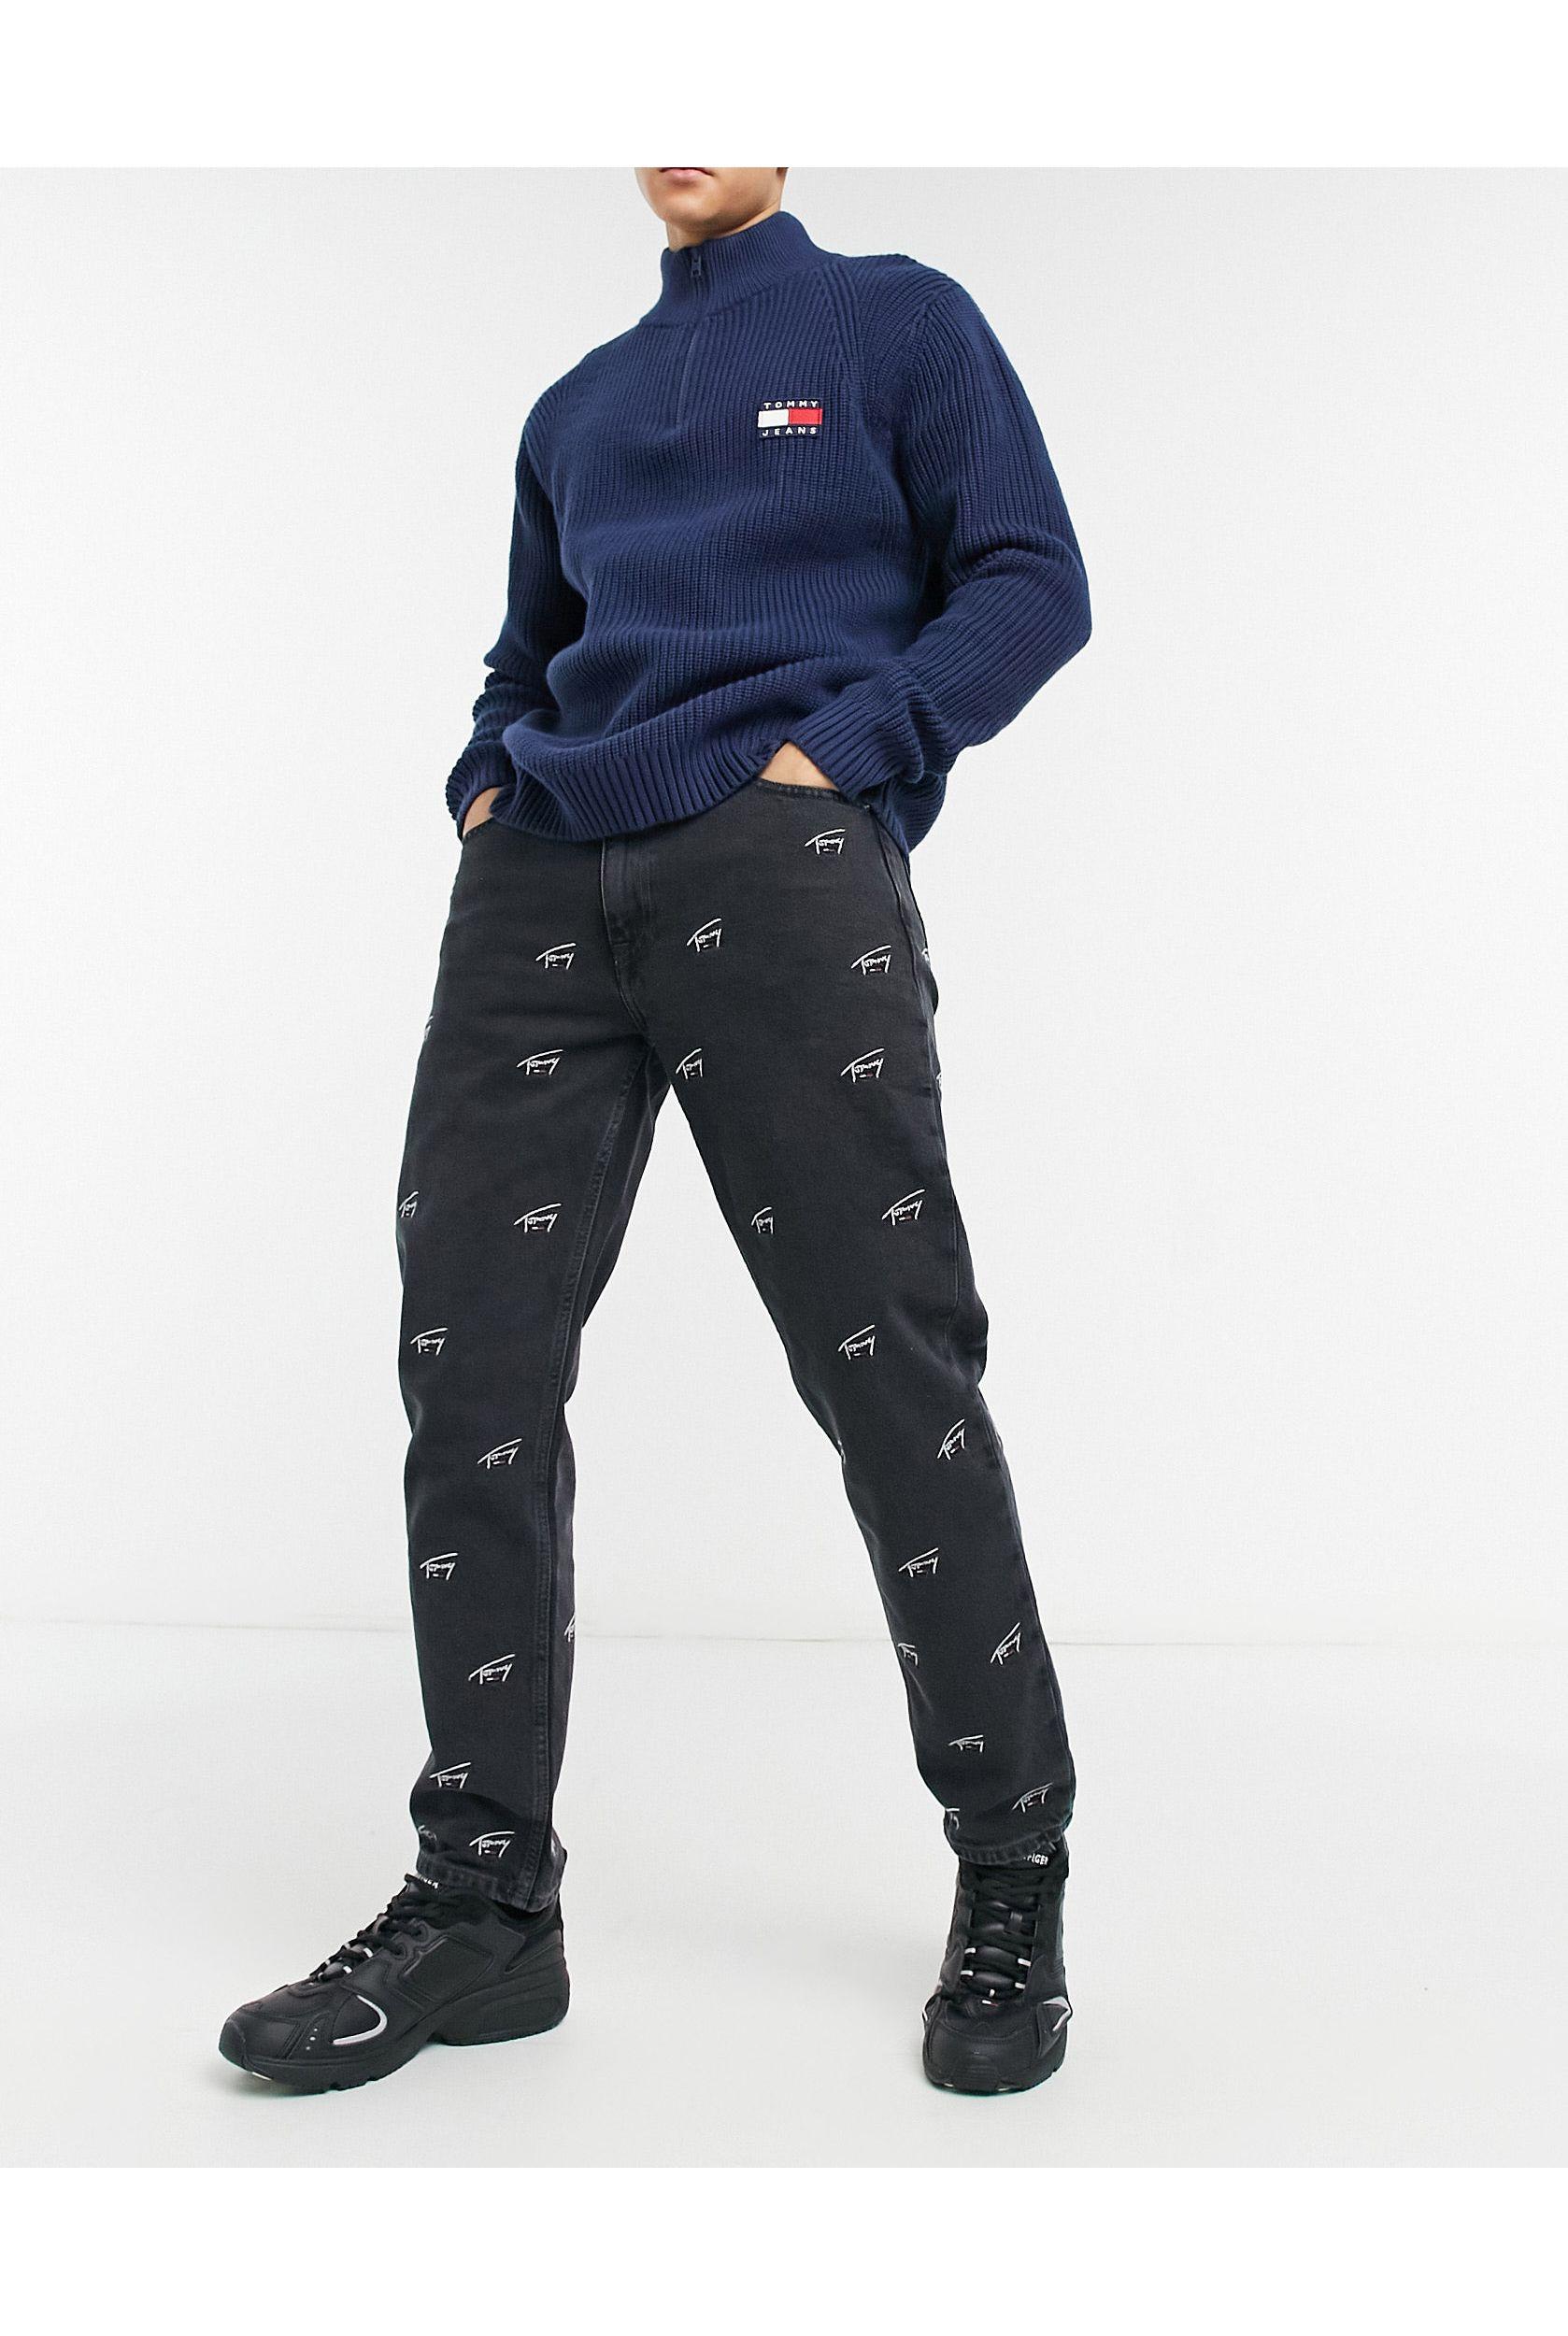 Hilfiger Straight Fit All Over Logo Jean in Black for |